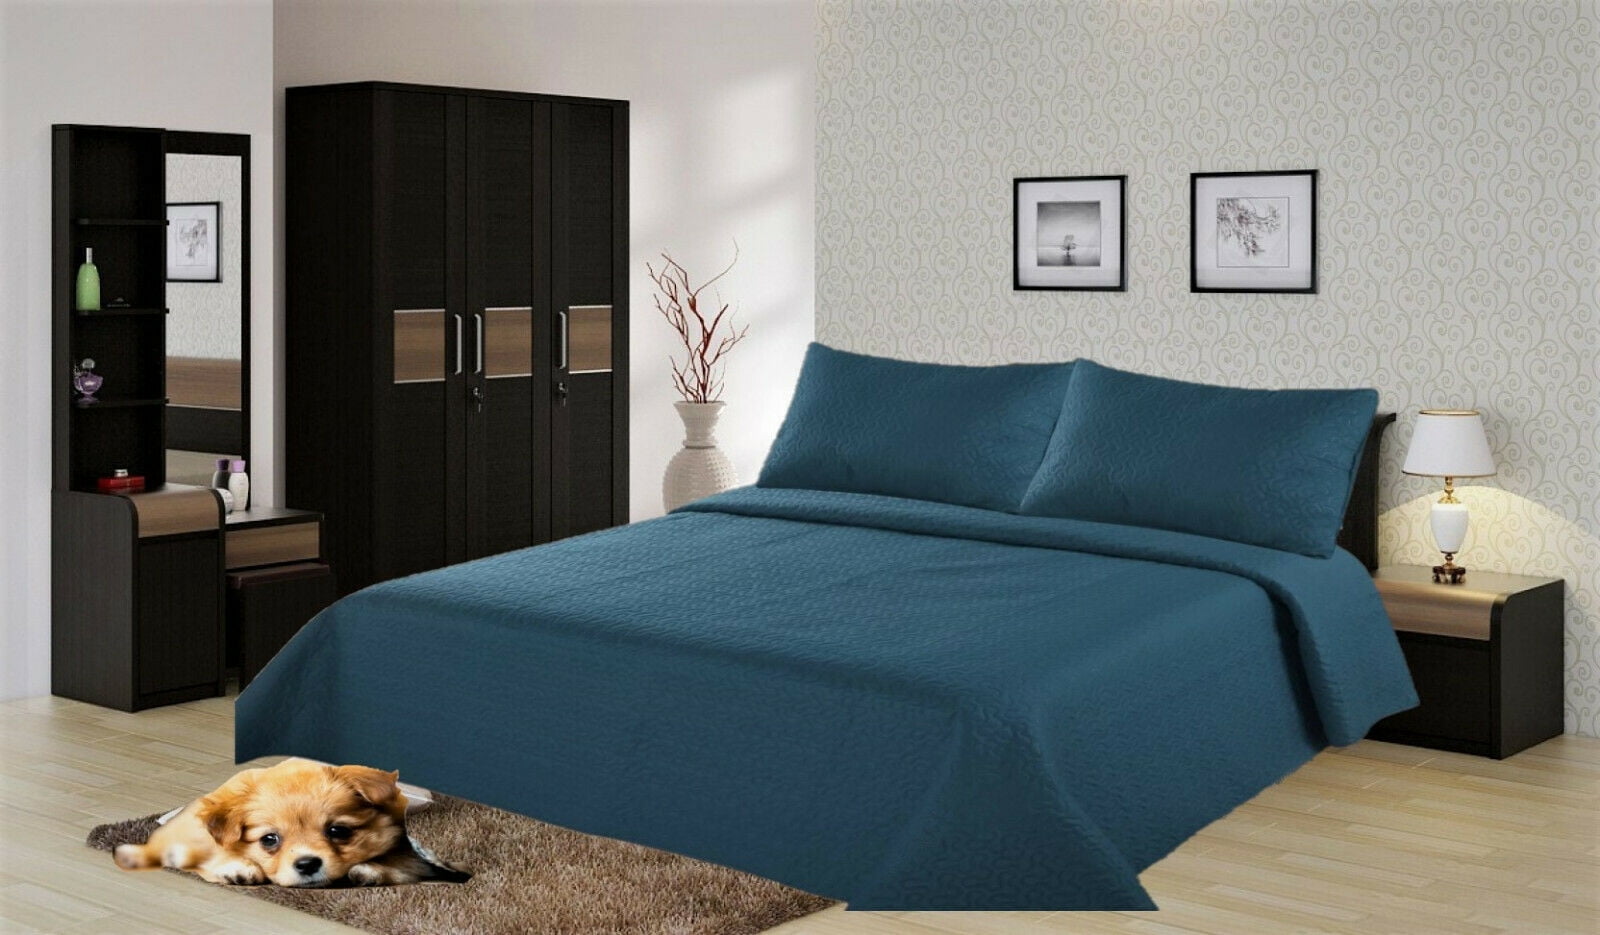 NENA AQUA BLUE Solid Hypoallergenic Quilt Bedspread Bed Bedding Coverlets Cover 